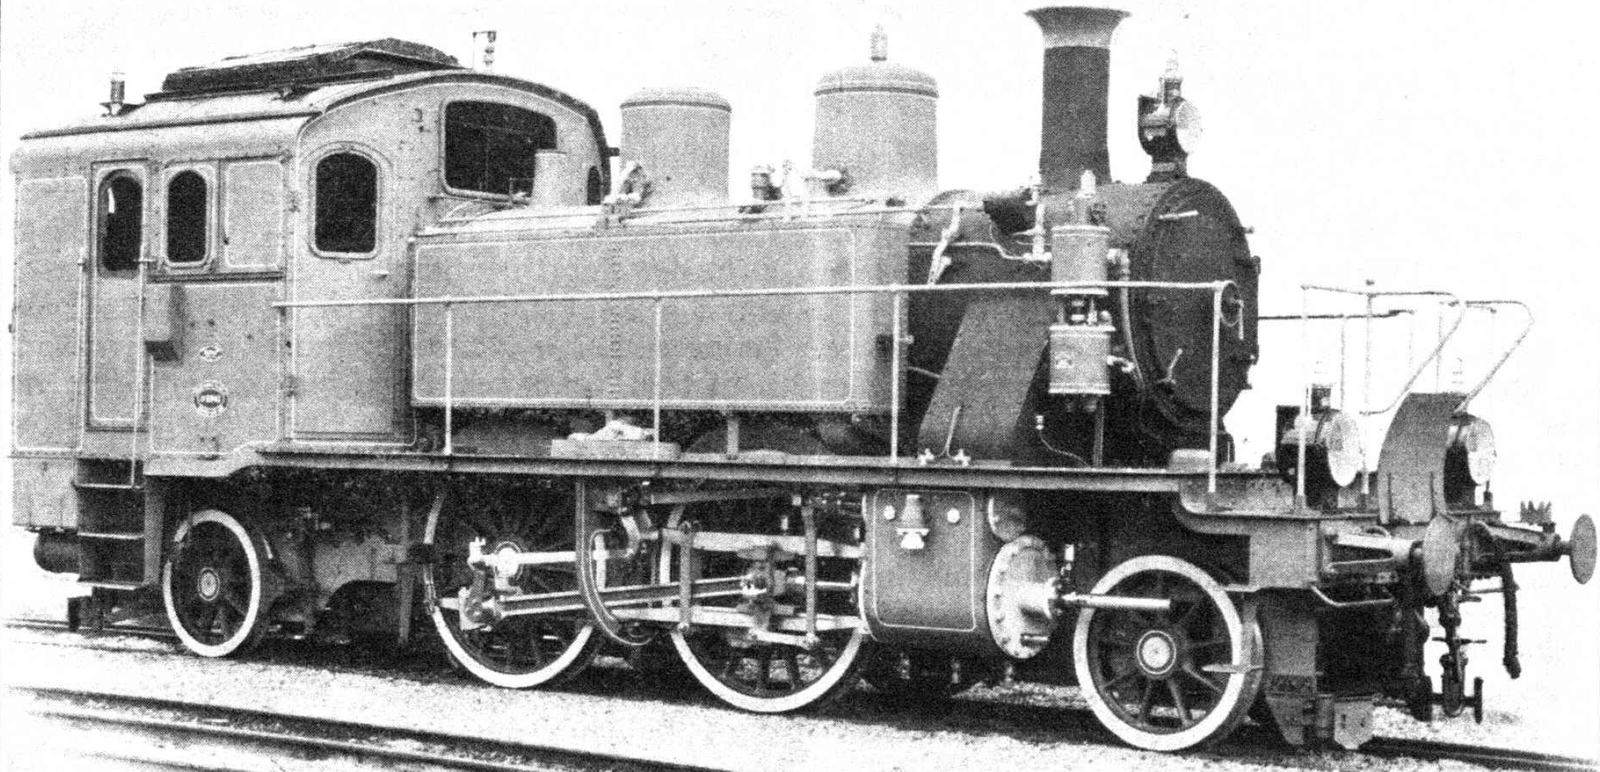 Second variant (No. 5011 to 5012)